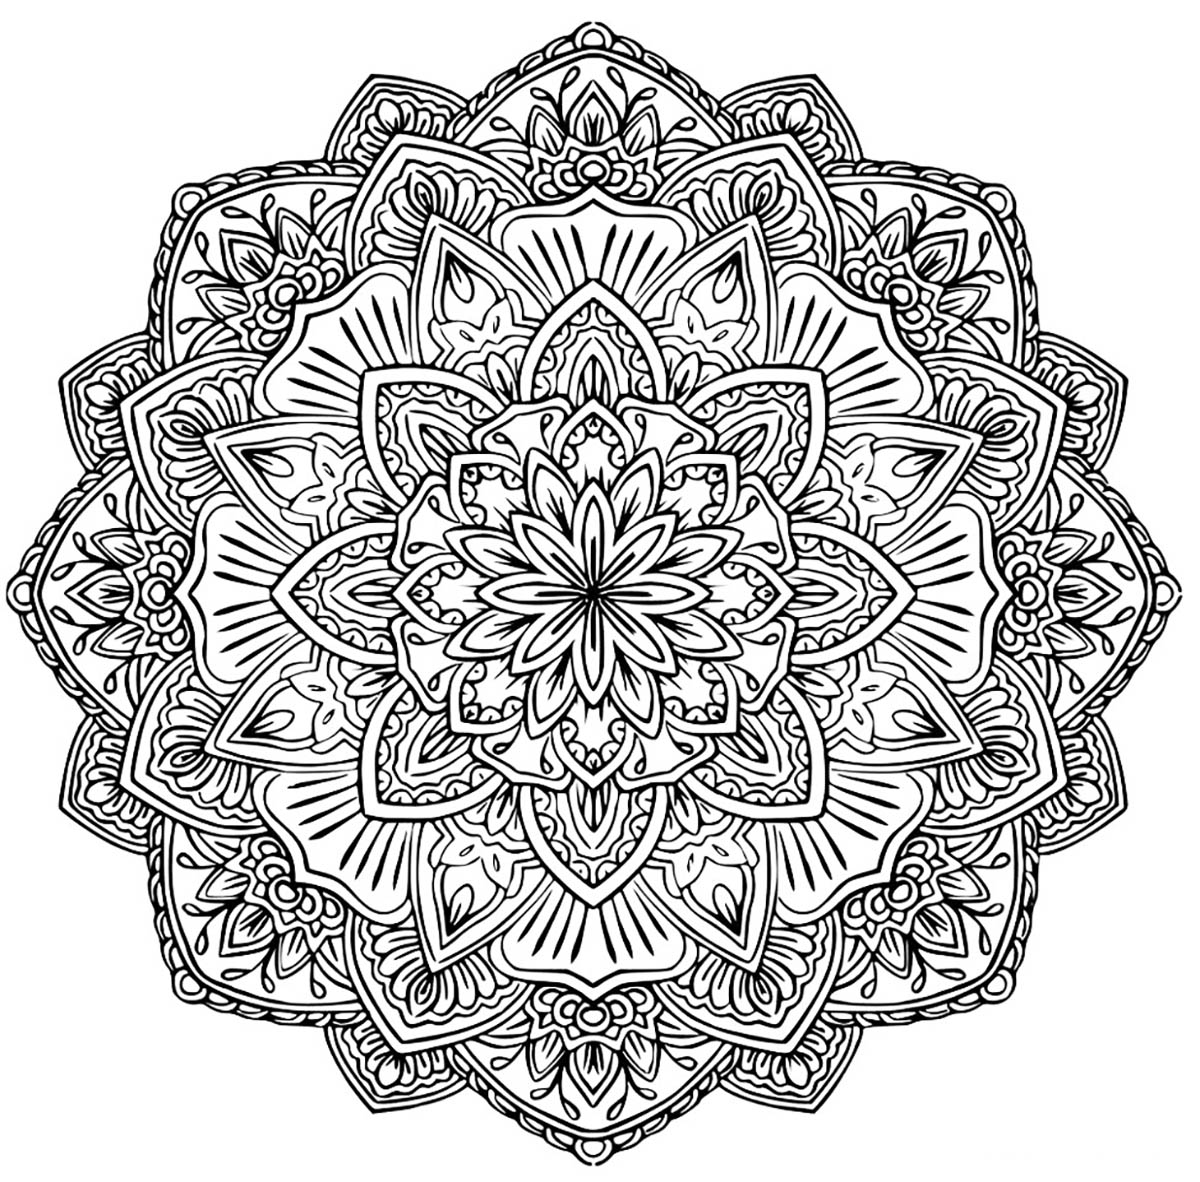 mandala-to-download-in-pdf-1-m-alas-adult-coloring-pages